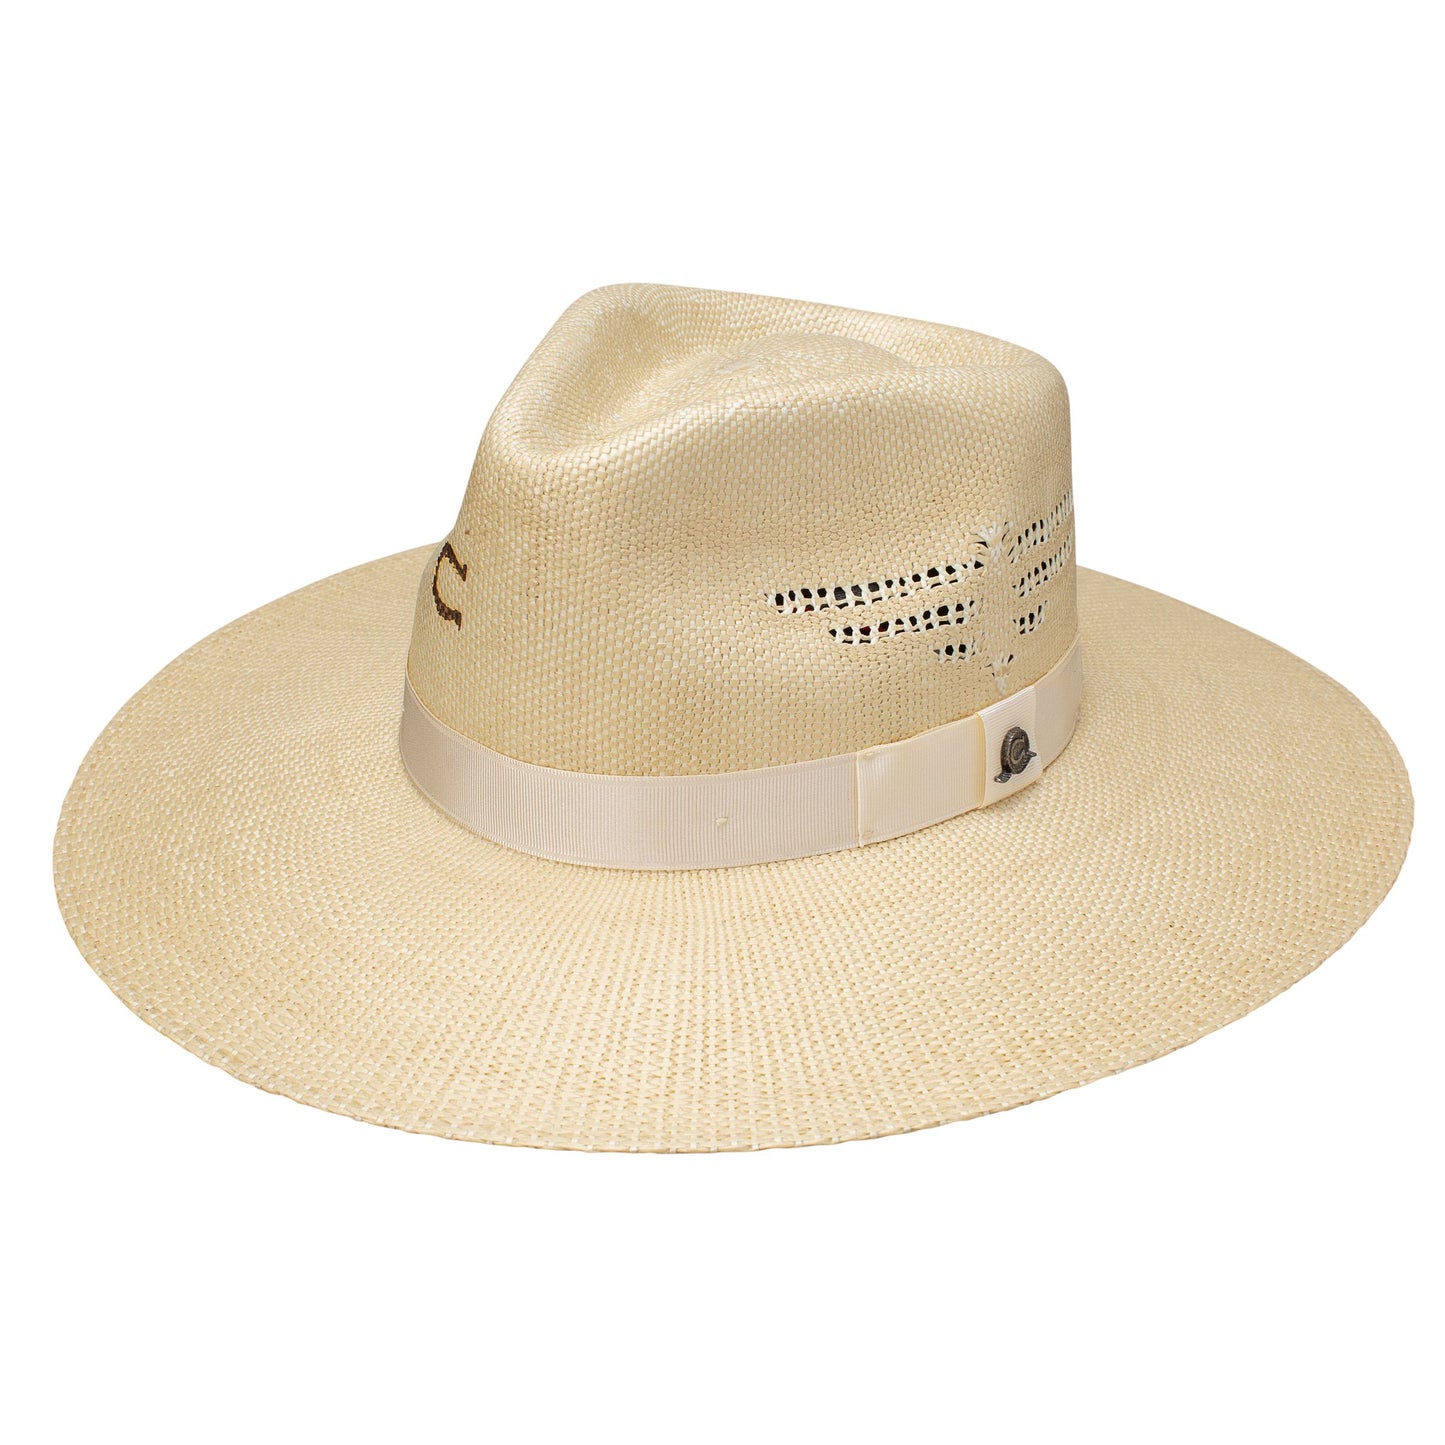 Mexico Shore Natural Straw Hat